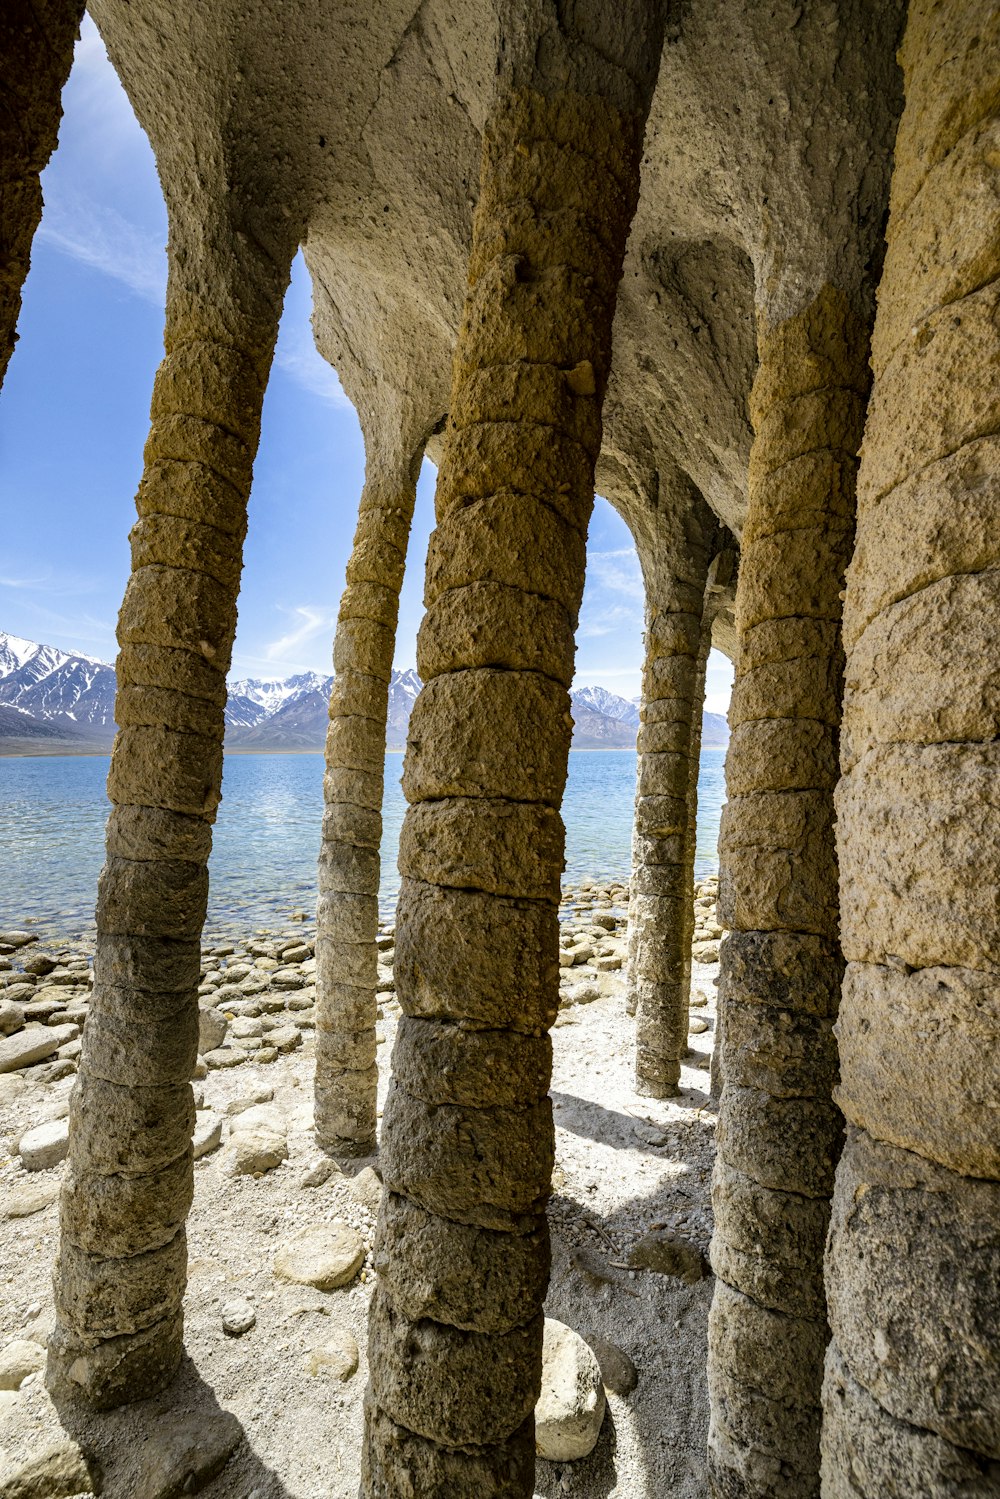 a row of stone pillars next to a body of water